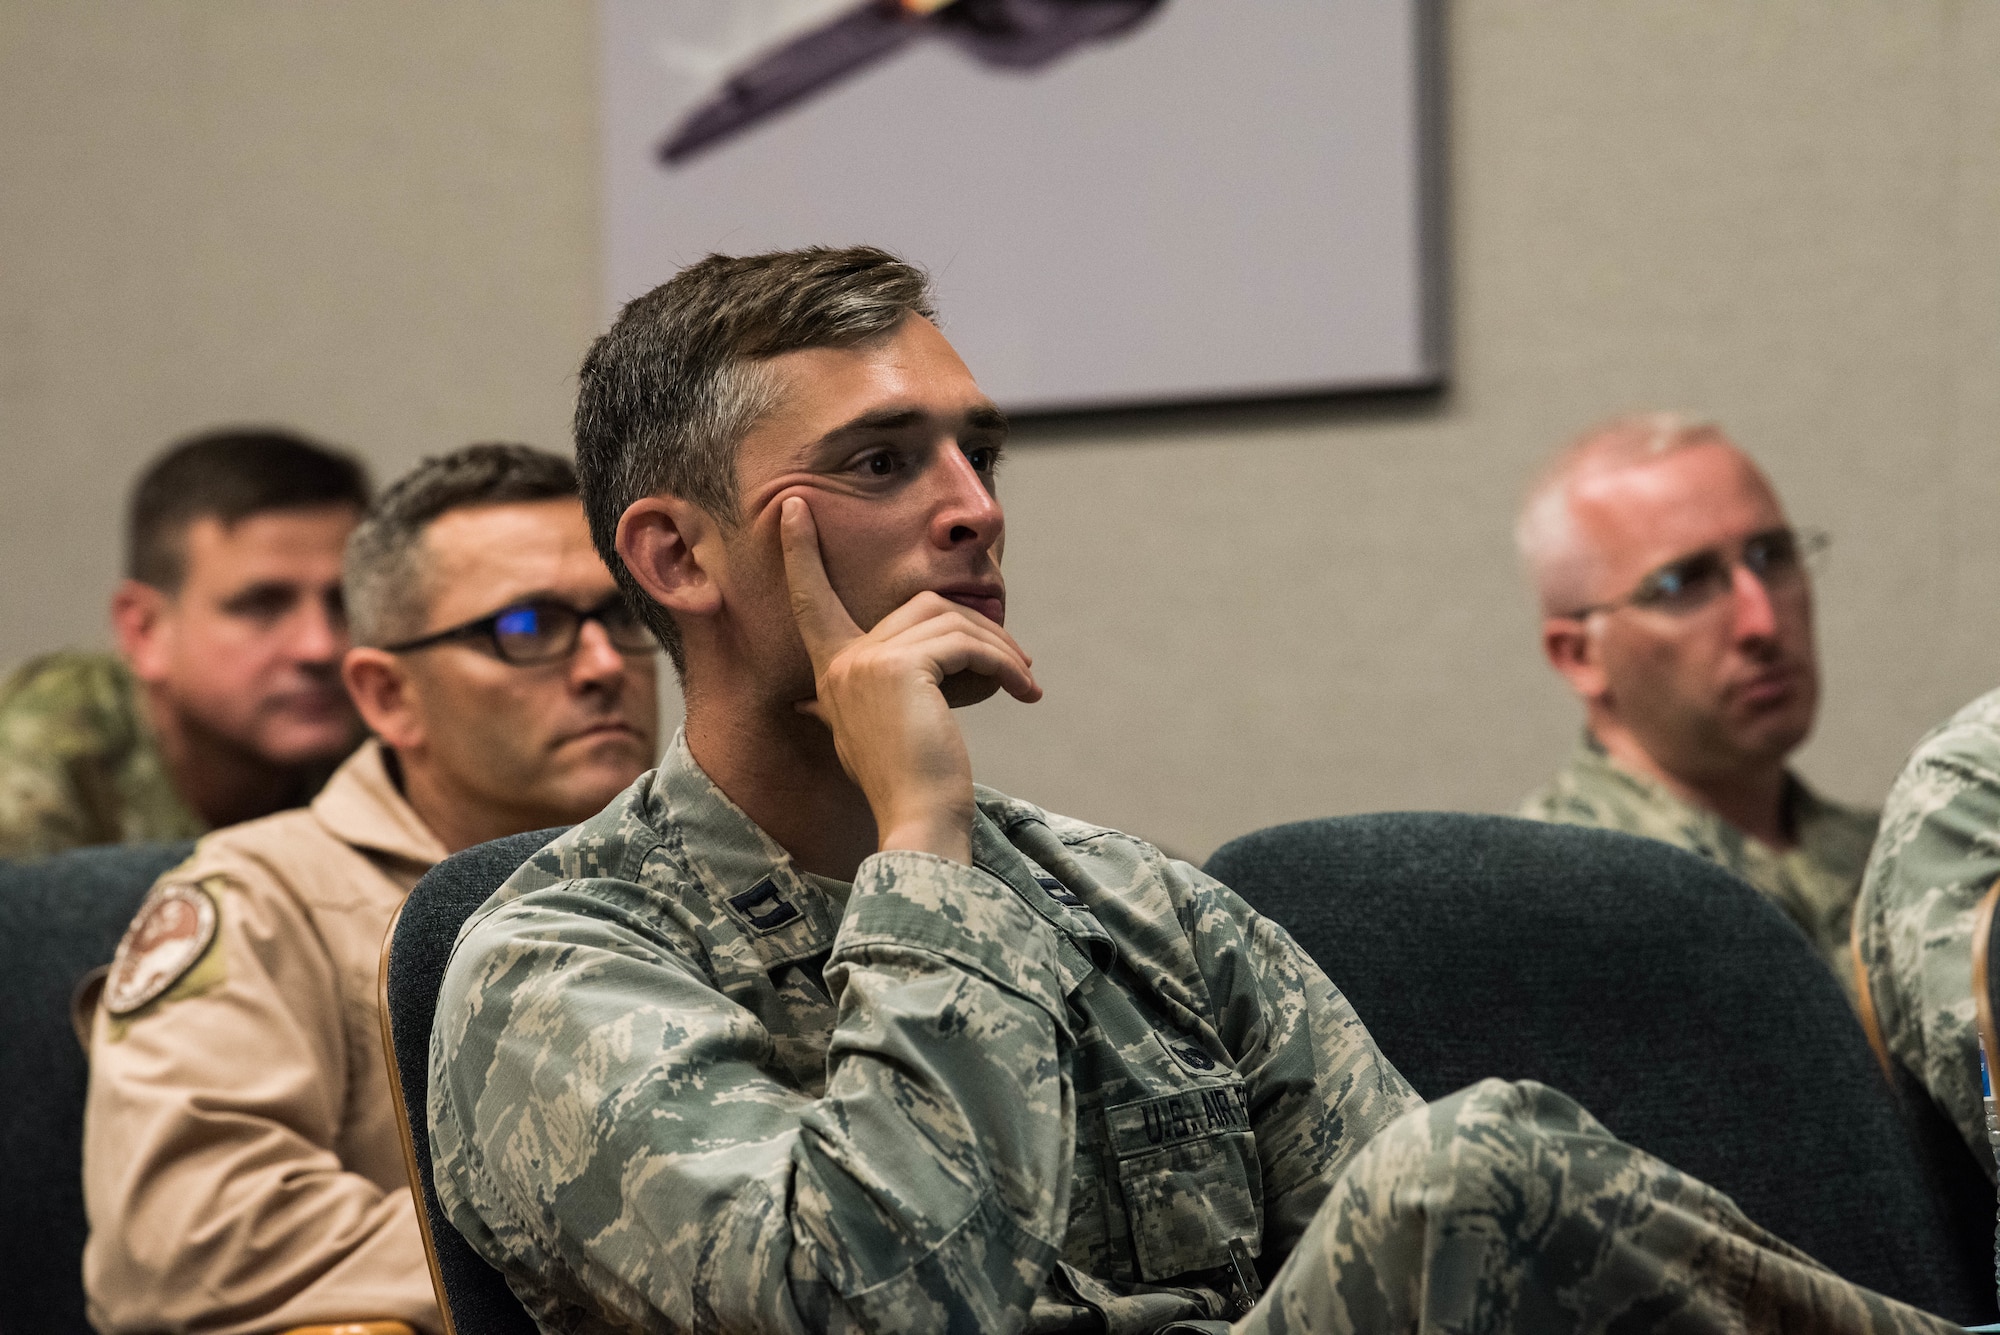 Participants of the Integrated Air and Missile Defense Center summit listen to a briefer give an update at the Hawaii Air National Guard Headquarters building, Joint Base Pearl Harbor-Hickam, Hawaii, Sept. 10, 2019. Along with briefings and updates, attendees were able to split up and conduct roundtable discussions to further understanding and allow for additional dialogue on various topics and the future of integrated air and missile defense. (U.S. Air Force photo by Staff Sgt. Hailey Haux)